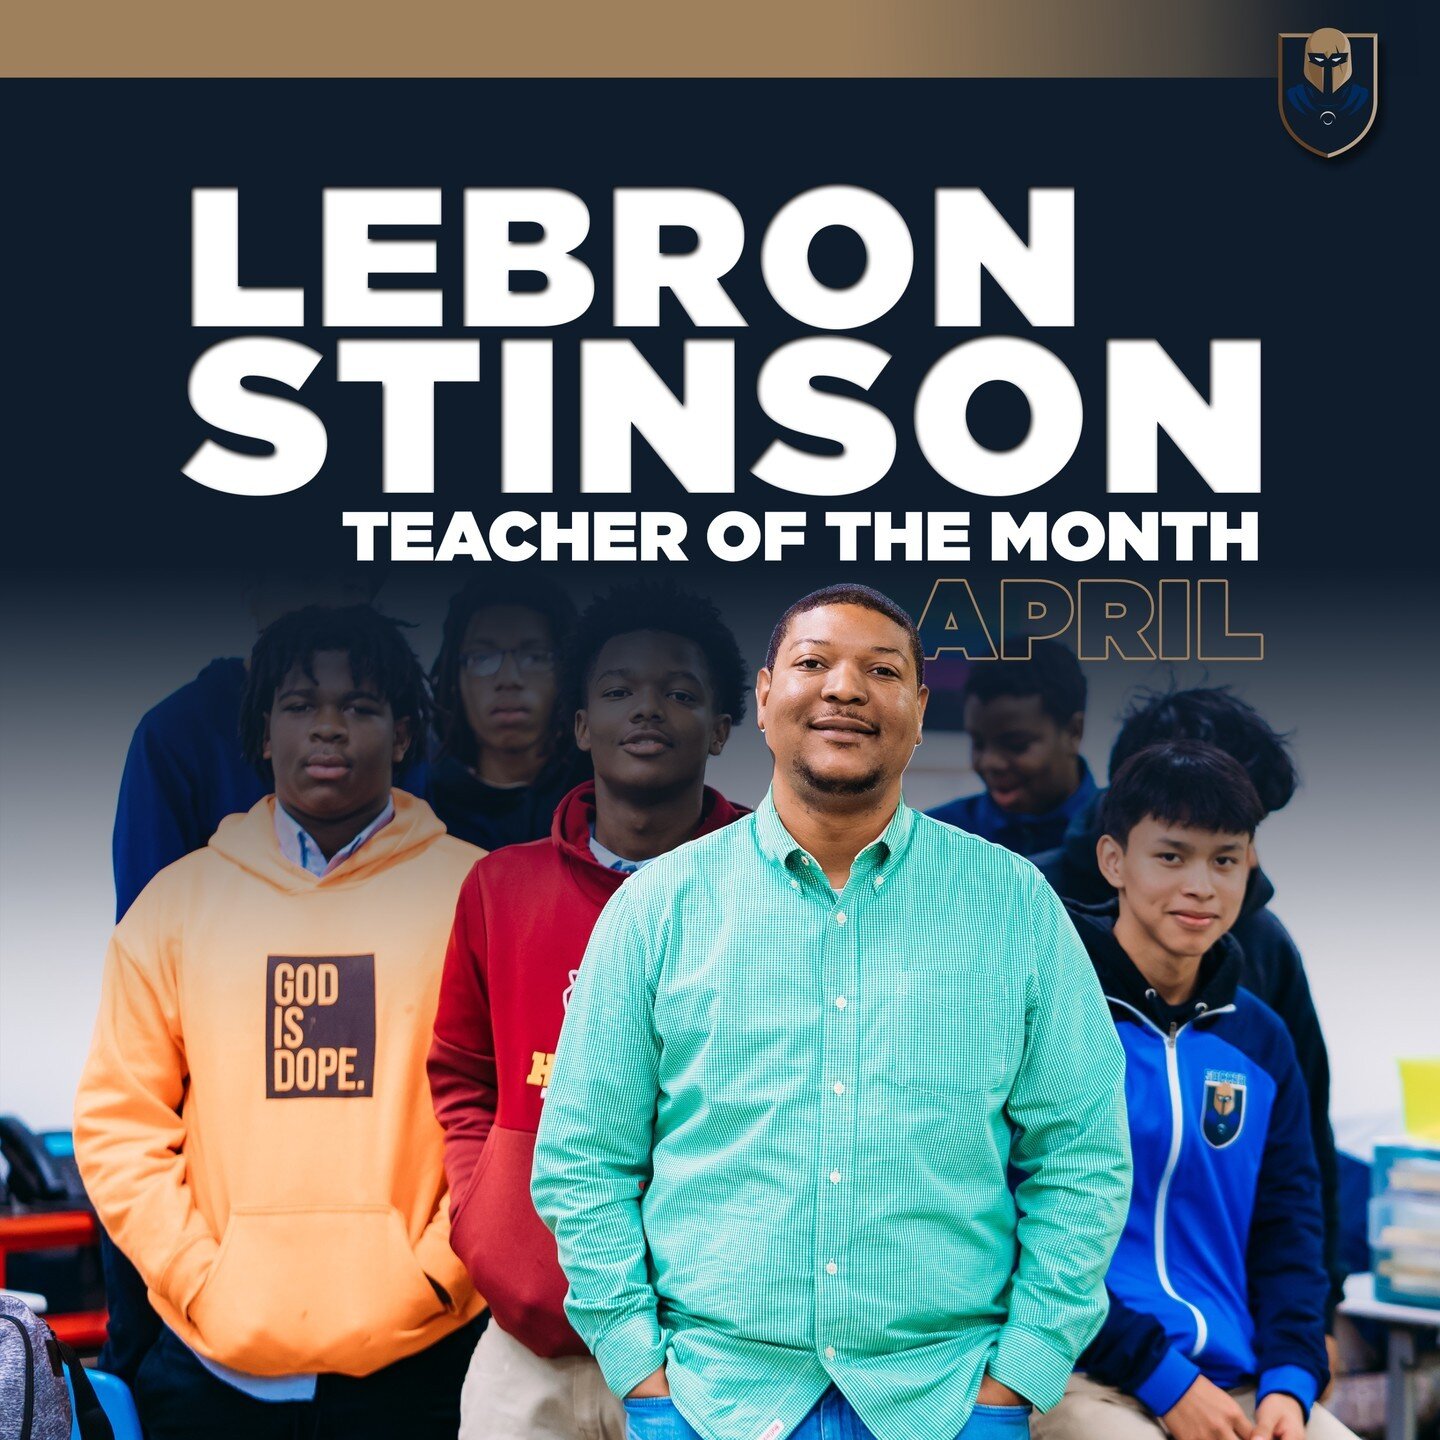 Help us congratulate our April Teacher of the Month, Lebron Stinson! Mr. Stinson is a high school math teacher and his advice to his students is &quot;Don't be afraid to make mistakes. Mistakes create learning opportunities.&quot;⠀
&bull;&bull;&bull;